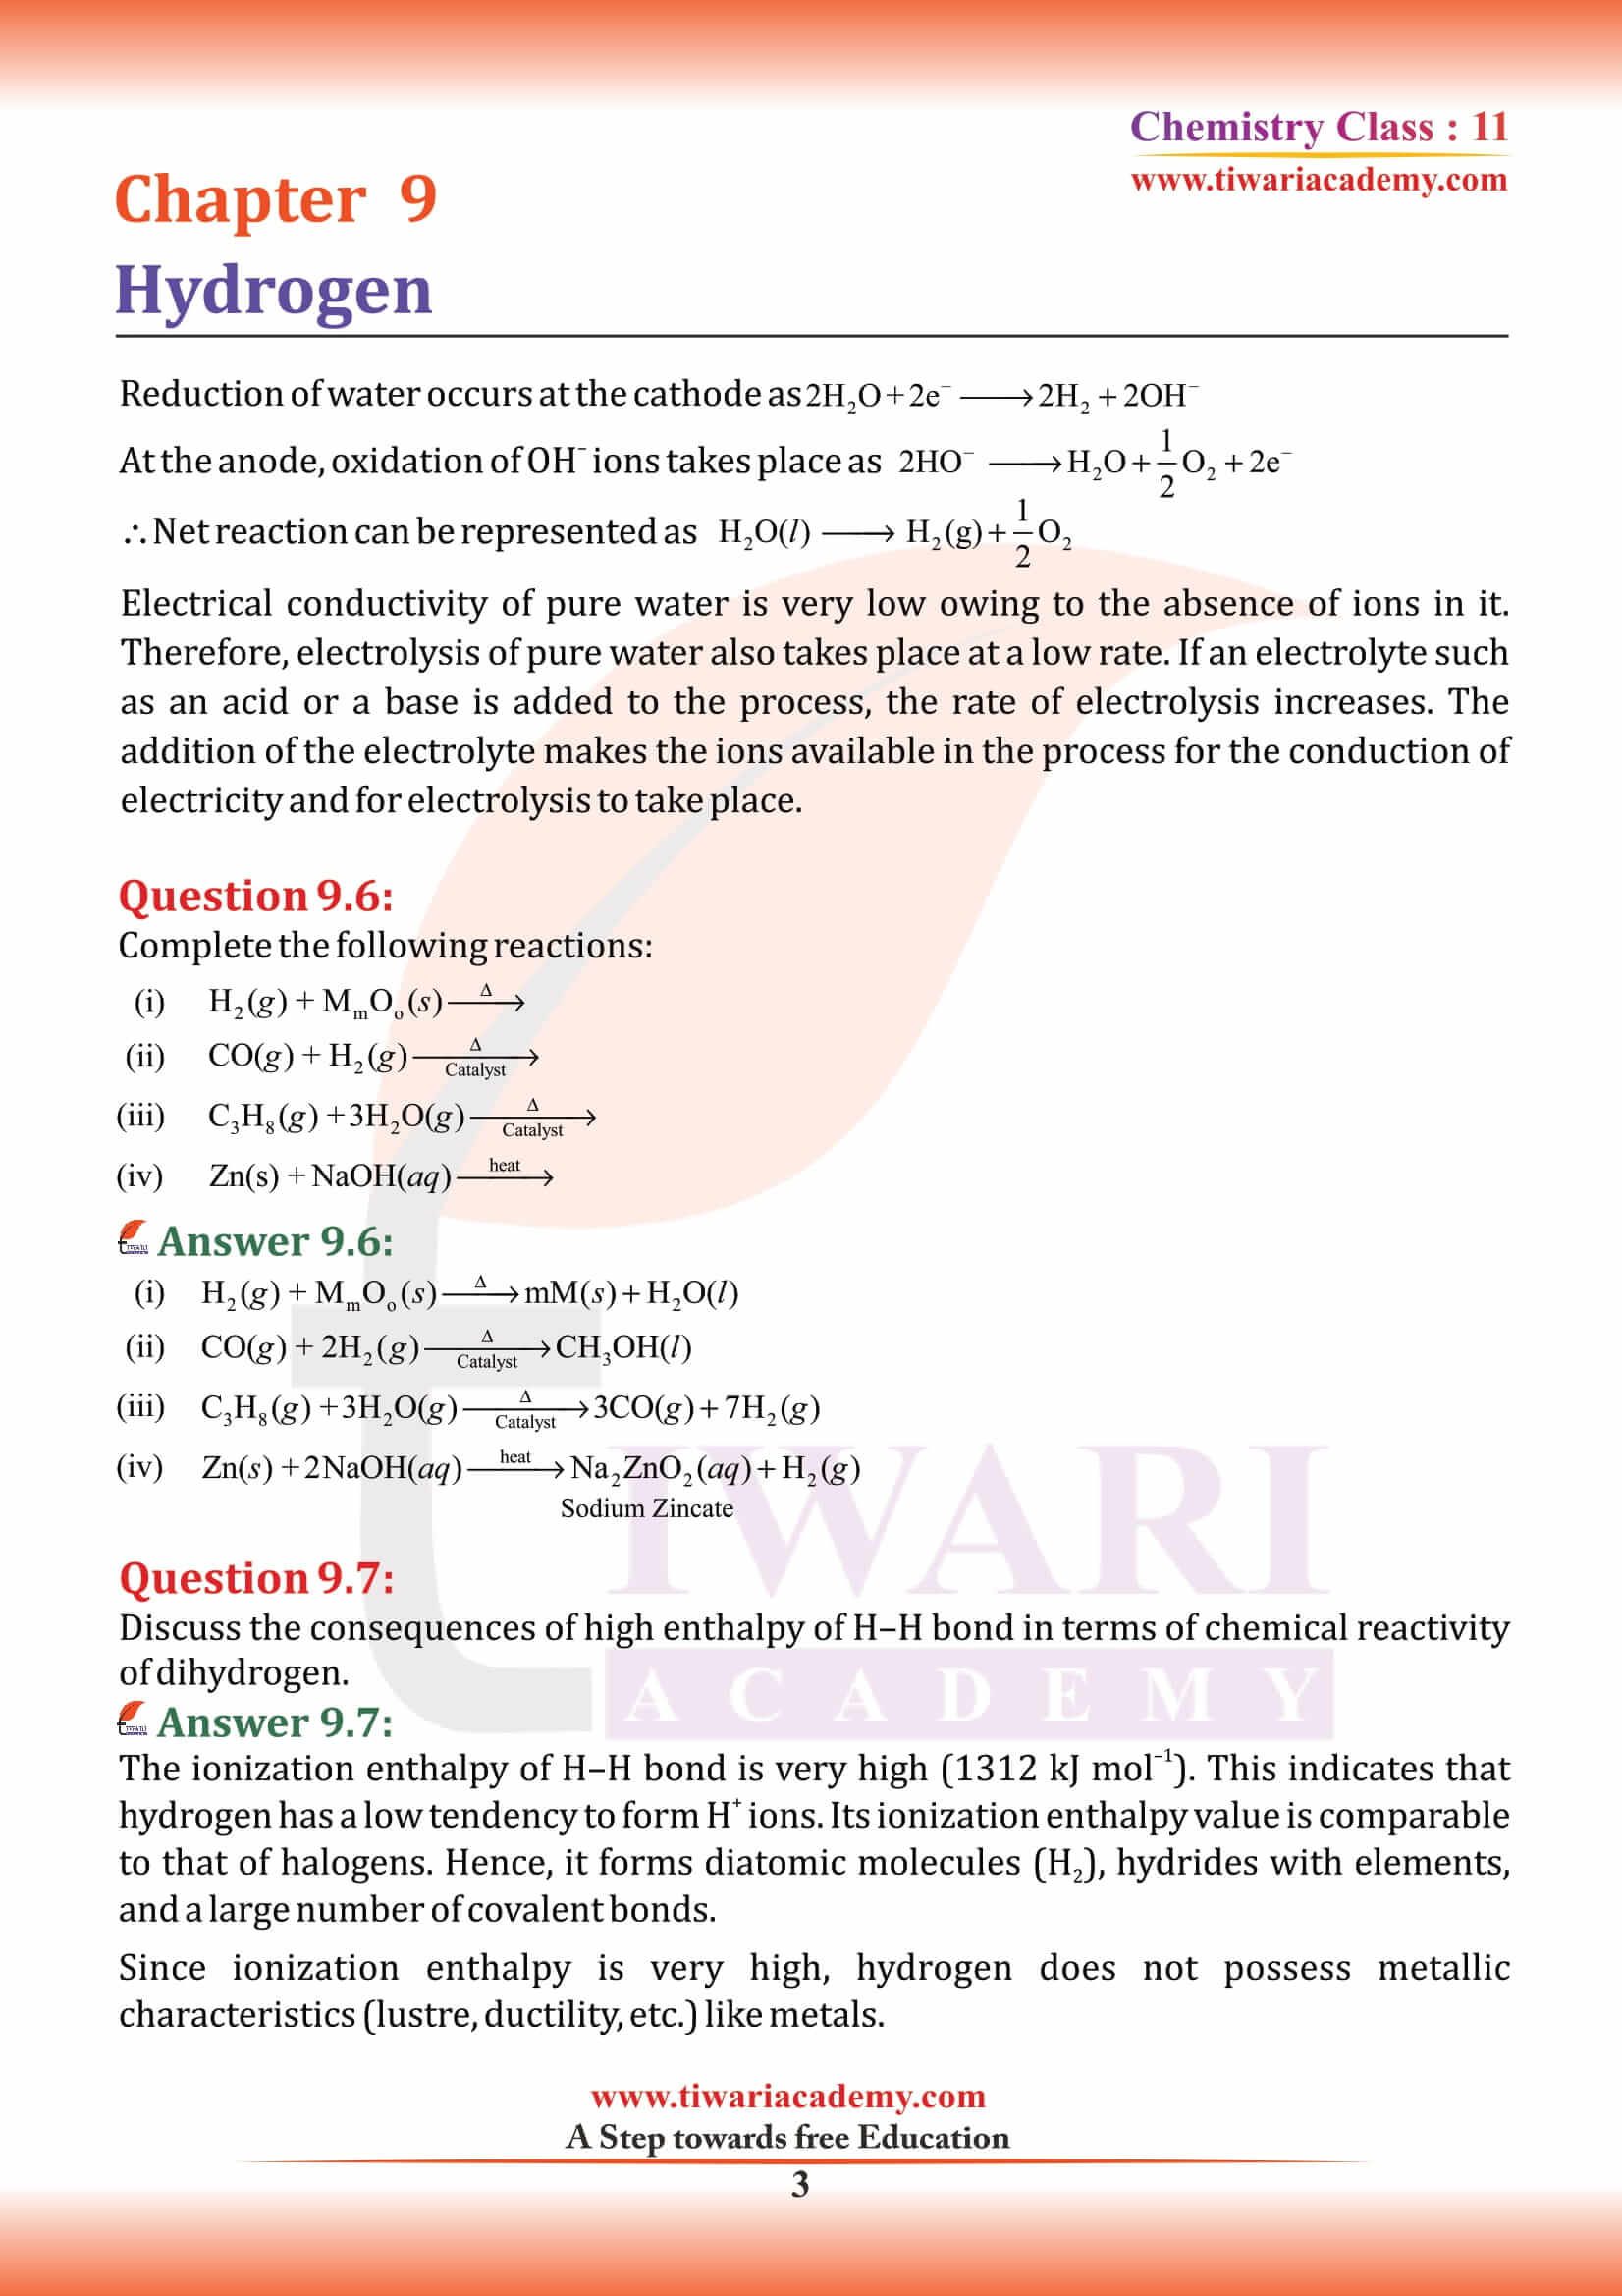 NCERT Solutions for Class 11 Chemistry Chapter 9 in English Medium